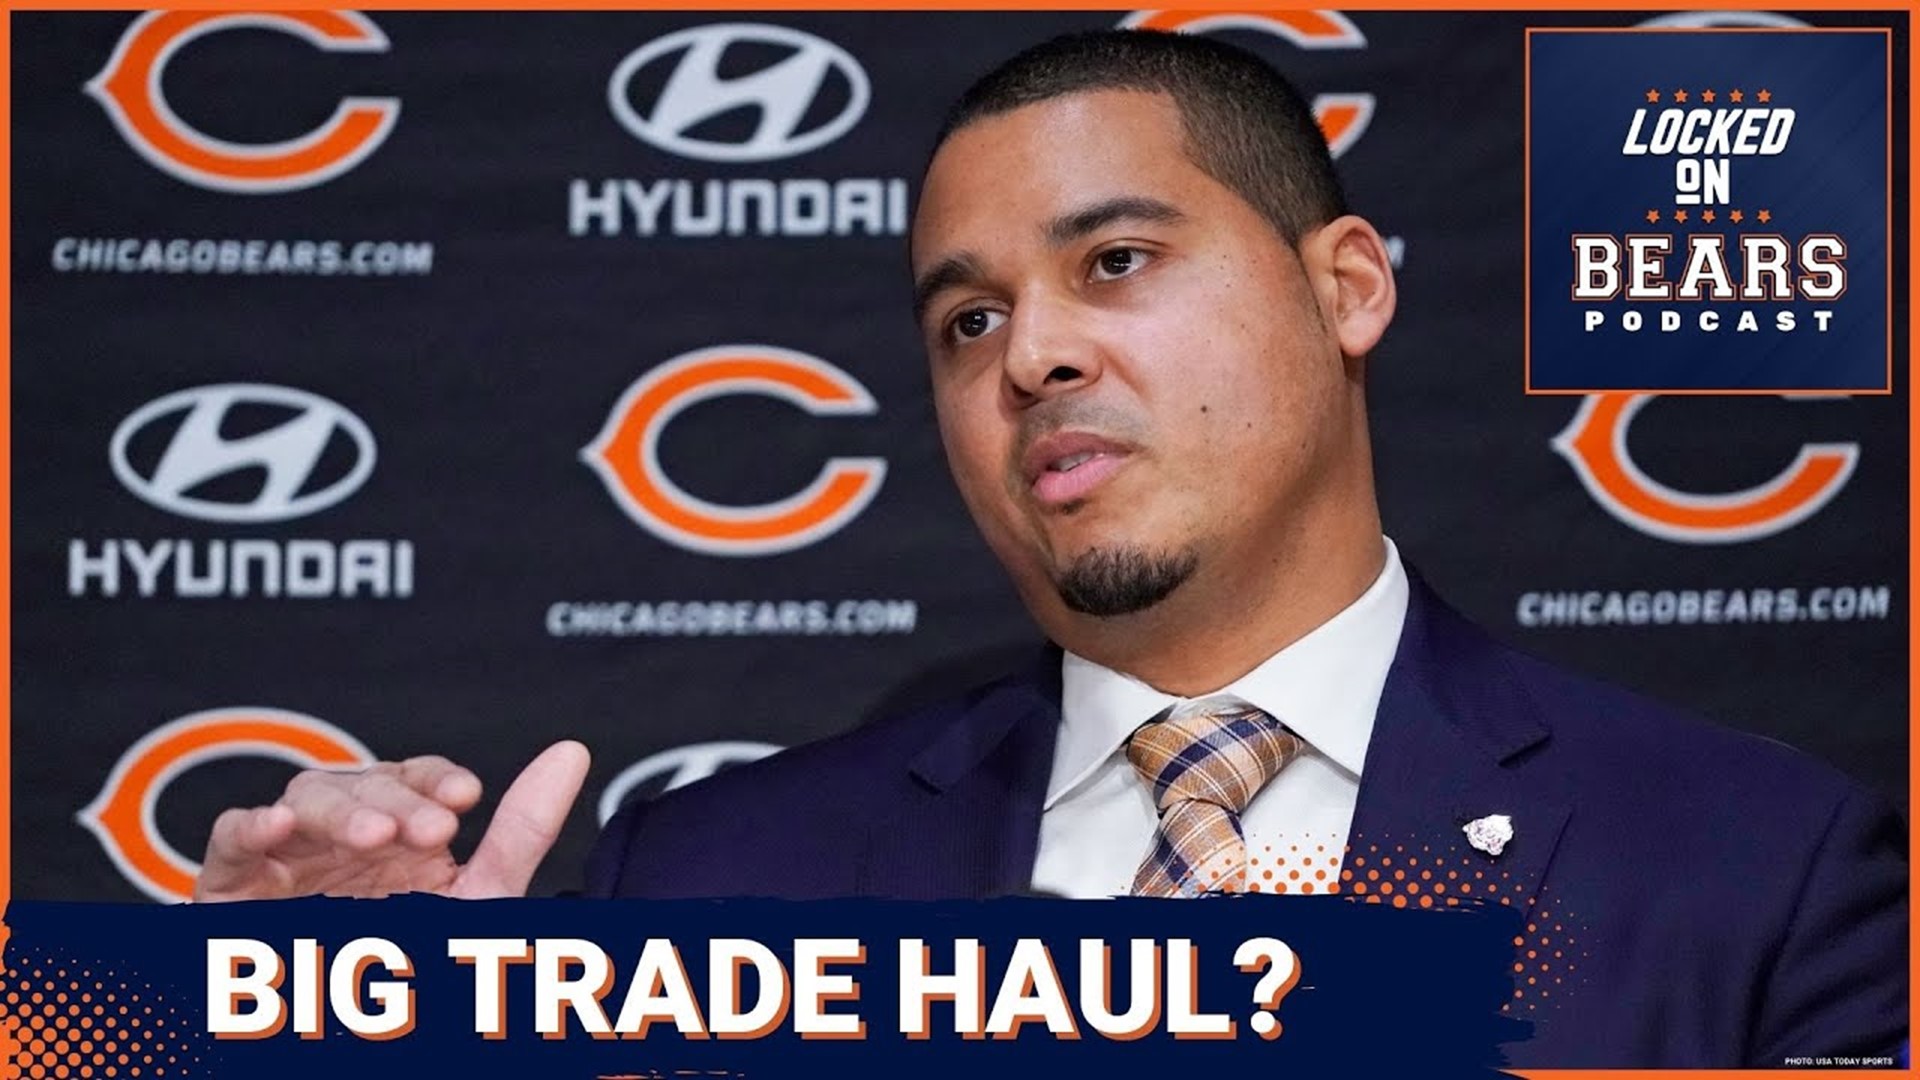 The Chicago Bears could get a bounty of NFL Draft picks by making a big trade down to a team like the Arizona Cardinals